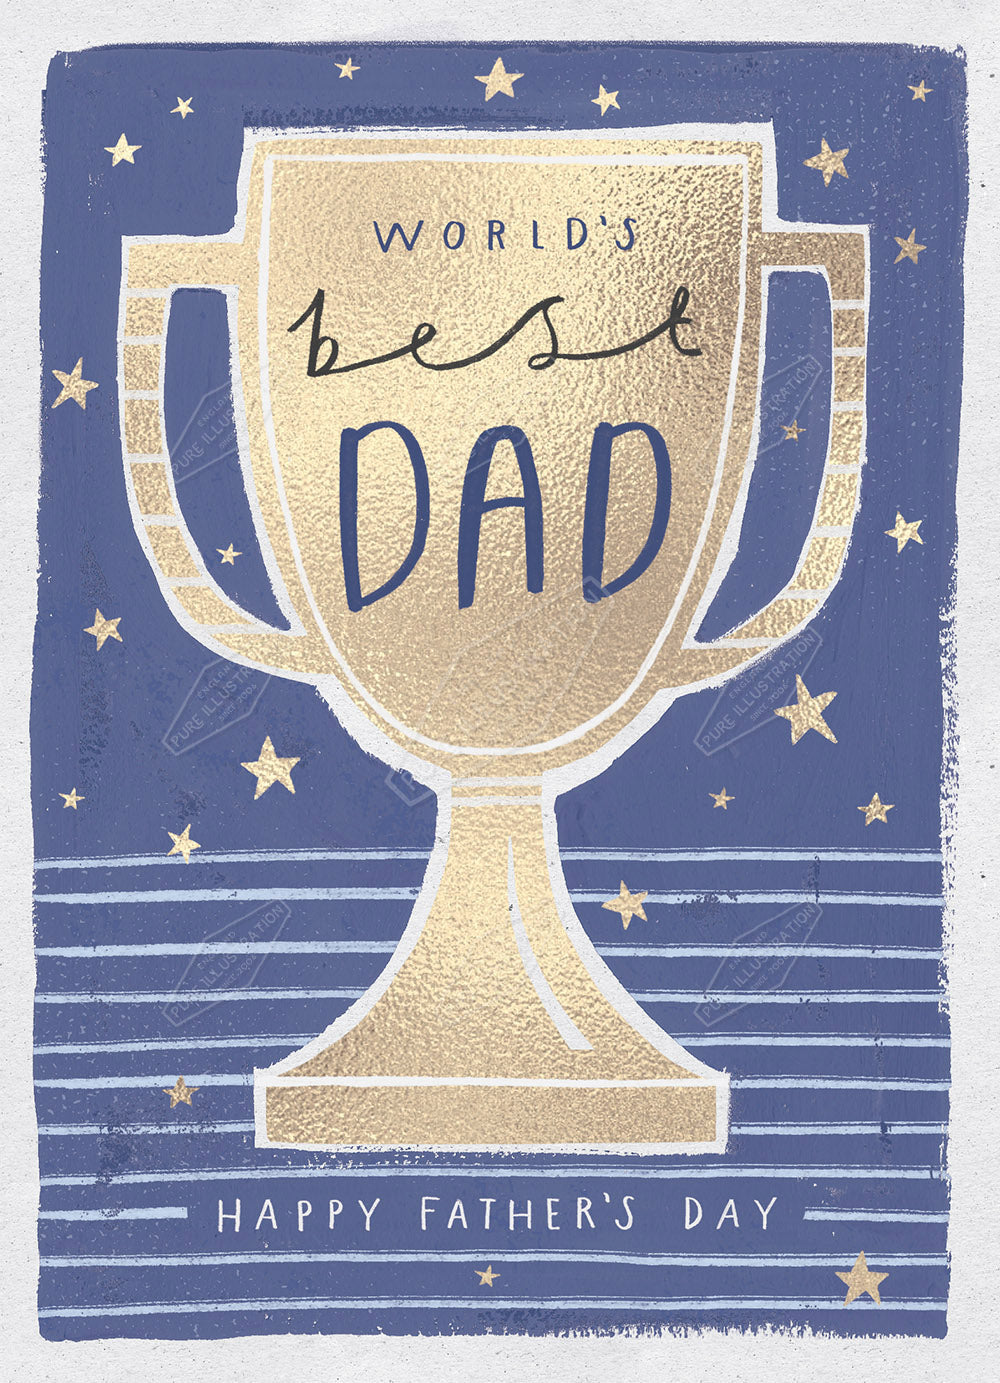 00034554KSP- Kerry Spurling  is represented by Pure Art Licensing Agency - Father's Day Greeting Card Design